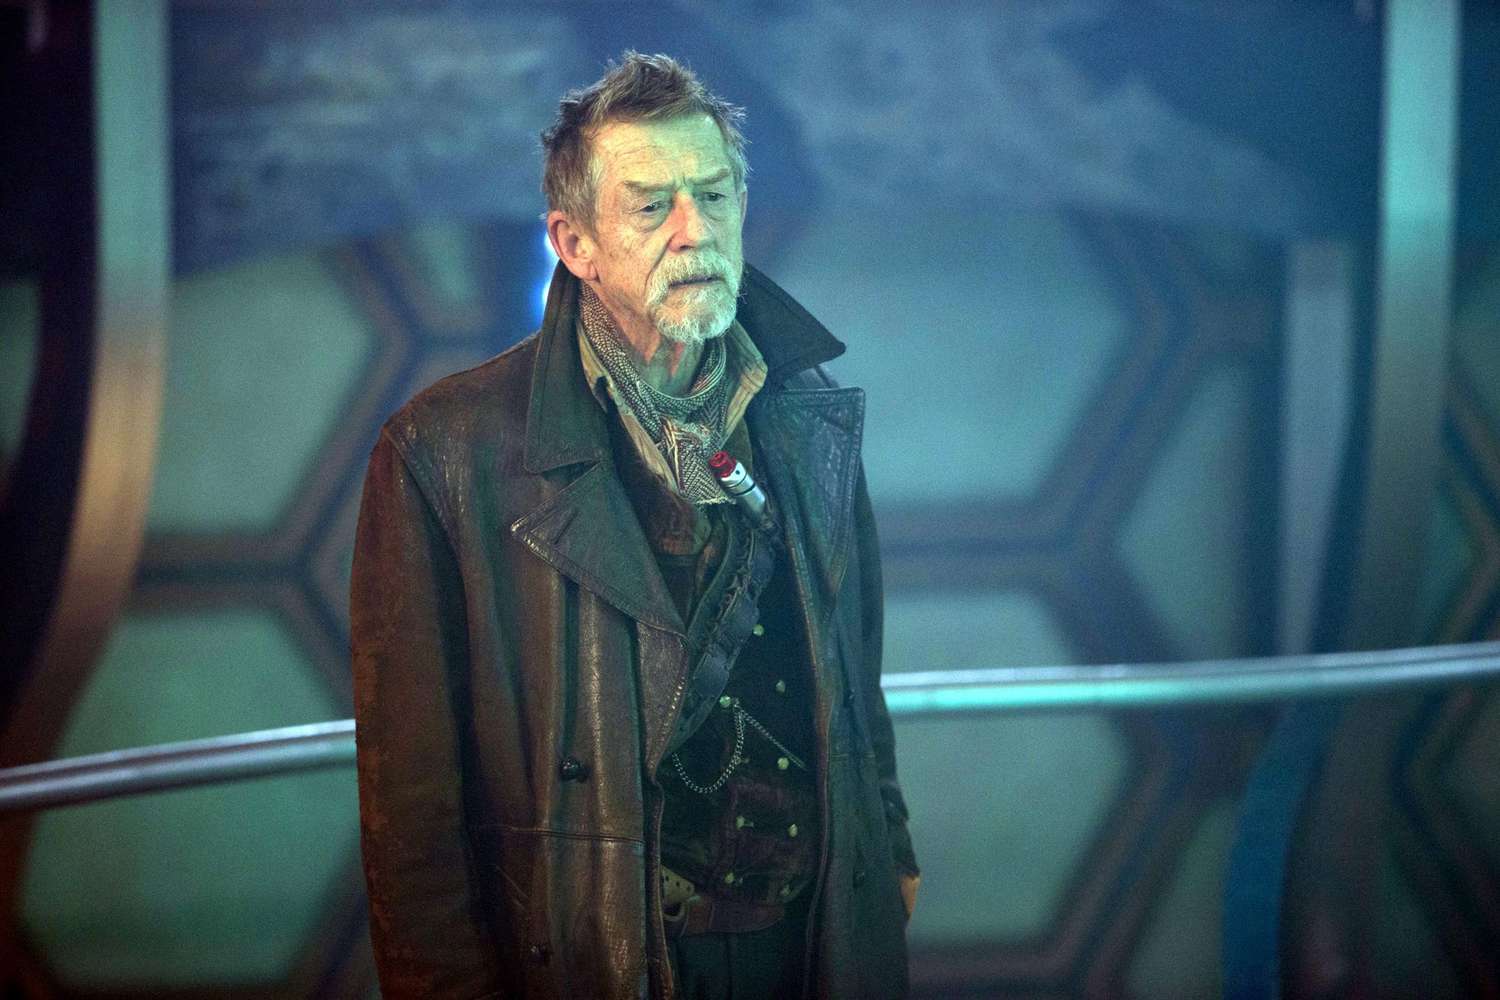 Doctor Who &sbquo;&Auml;&igrave; 50th Anniversary Special - The Day of the Doctor